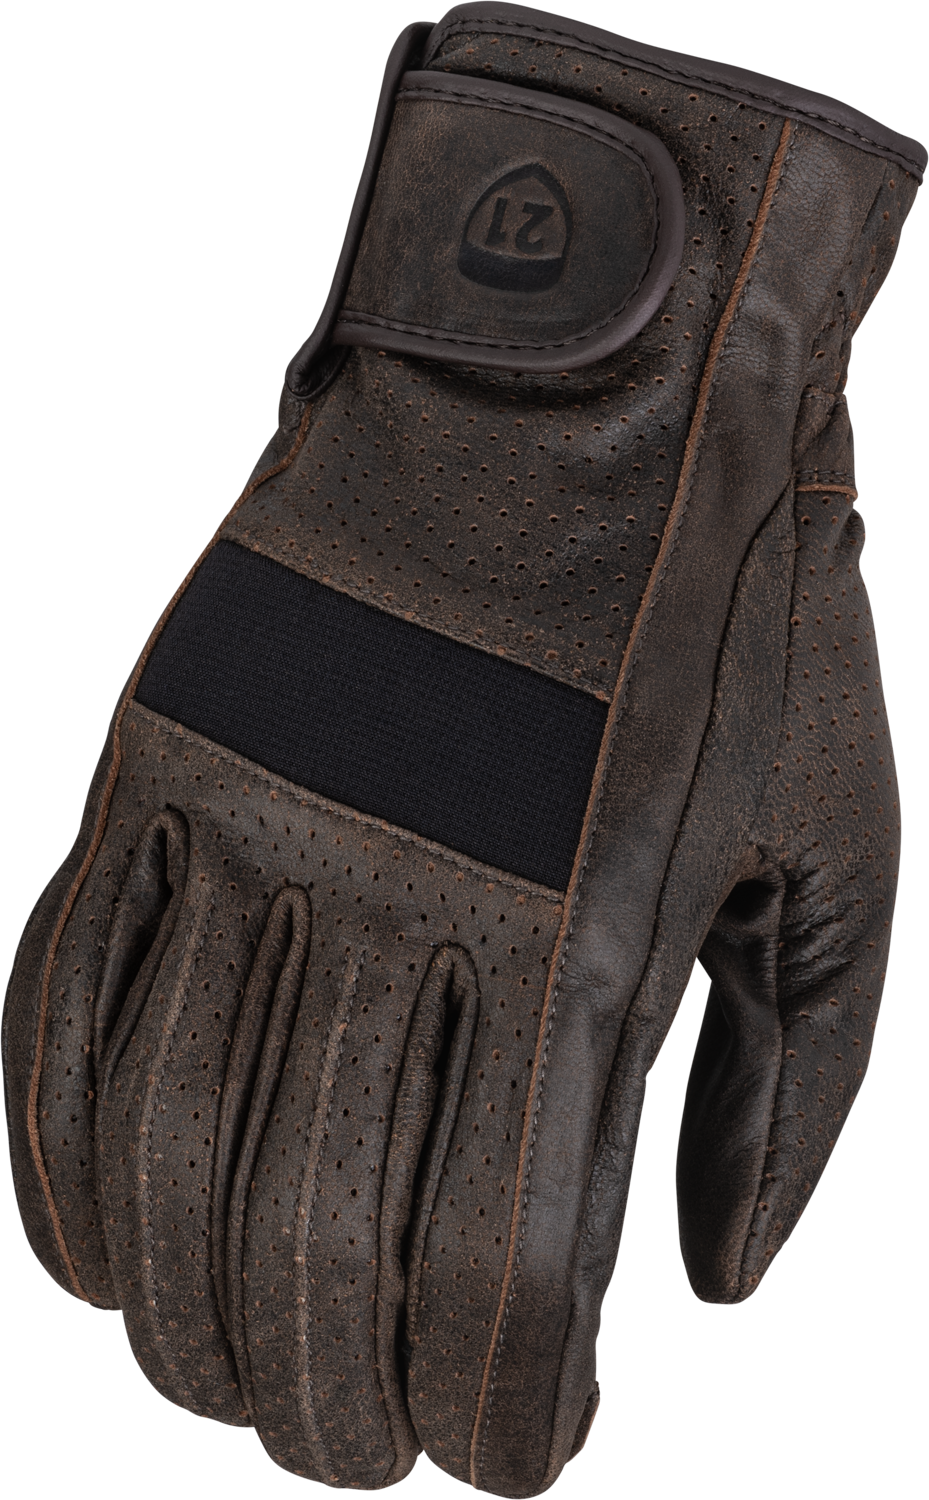 Jab Perforated Gloves Brown 4x